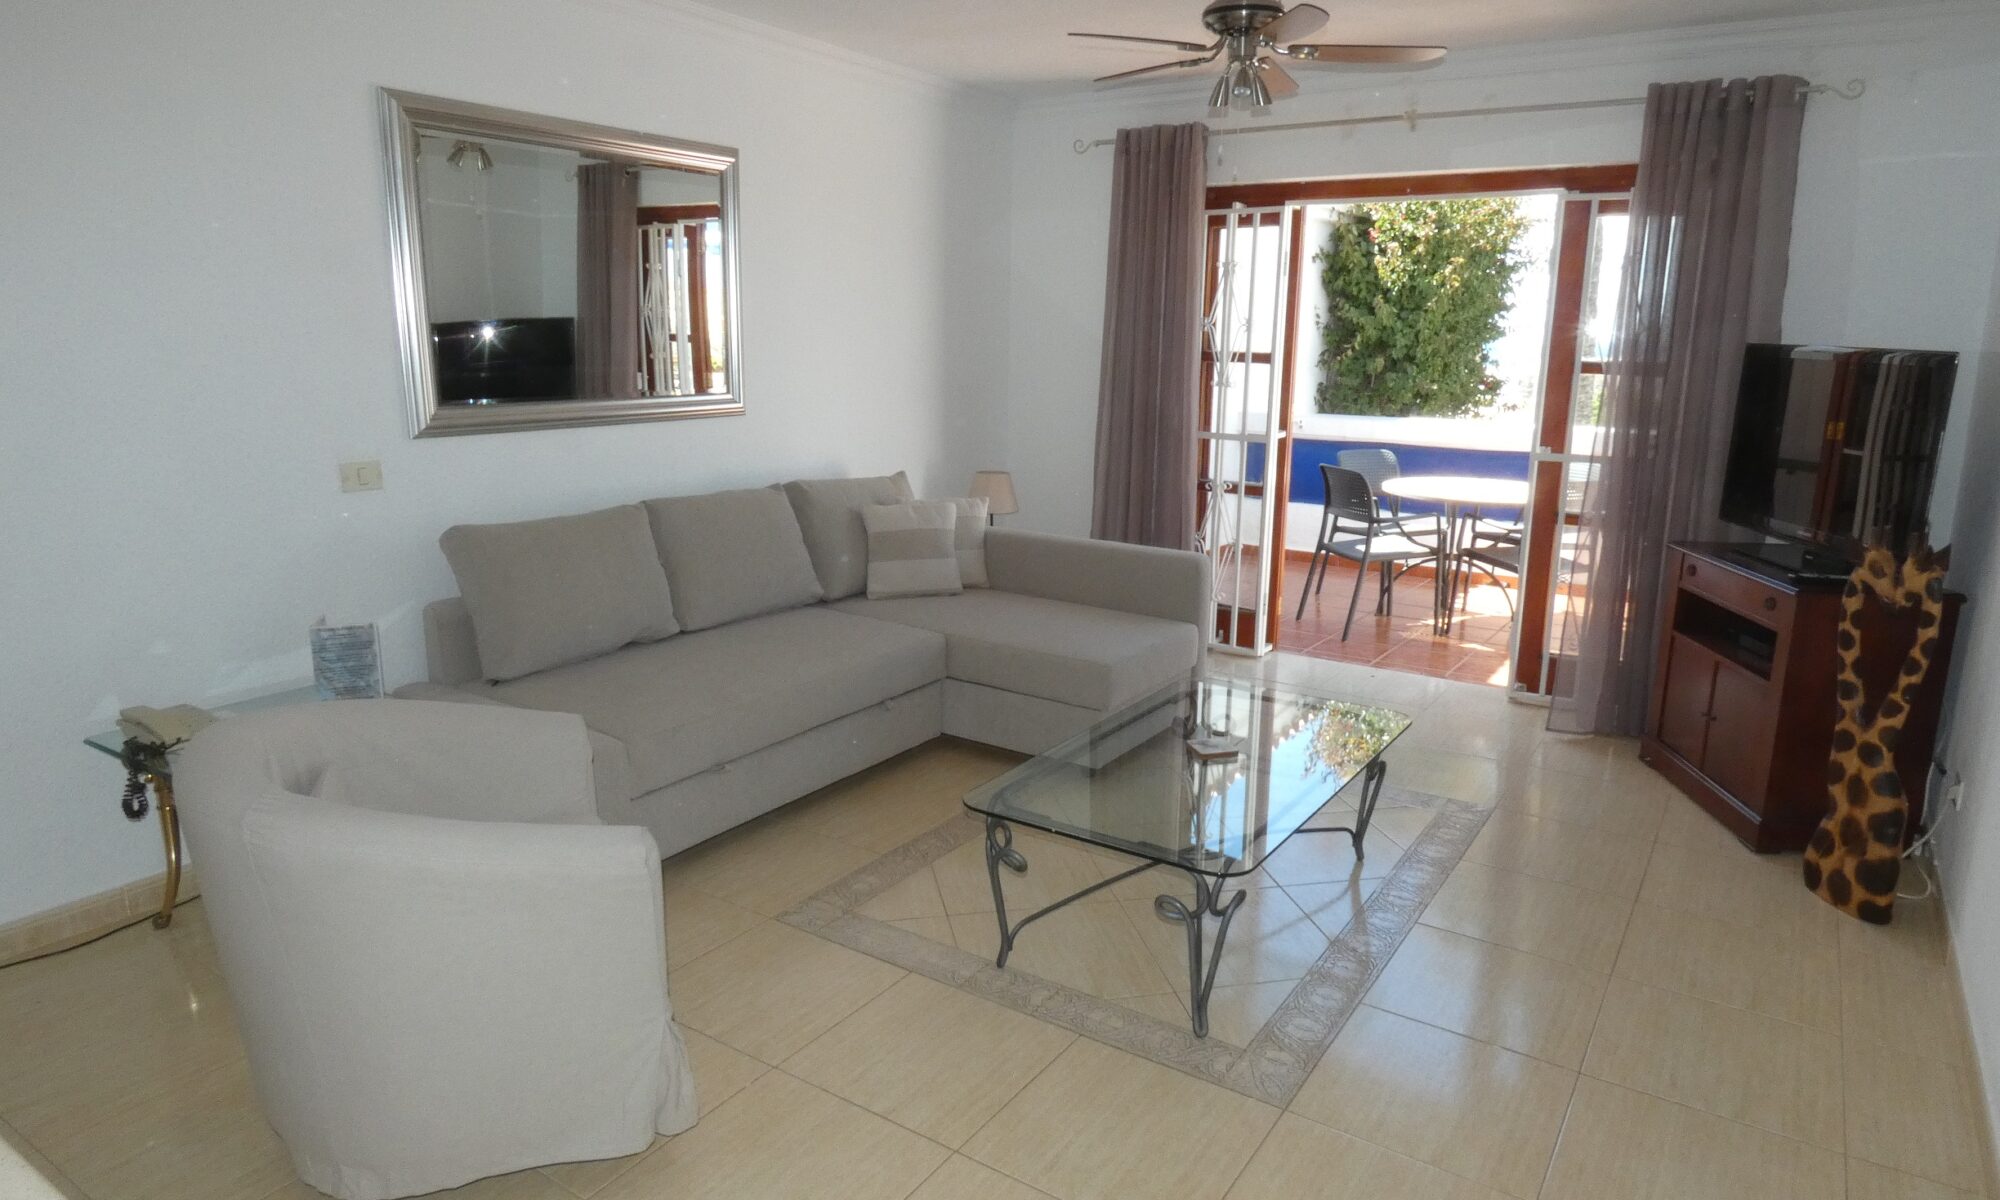 35 Royal Palm - Royal Palm Holiday Apartments in Tenerife